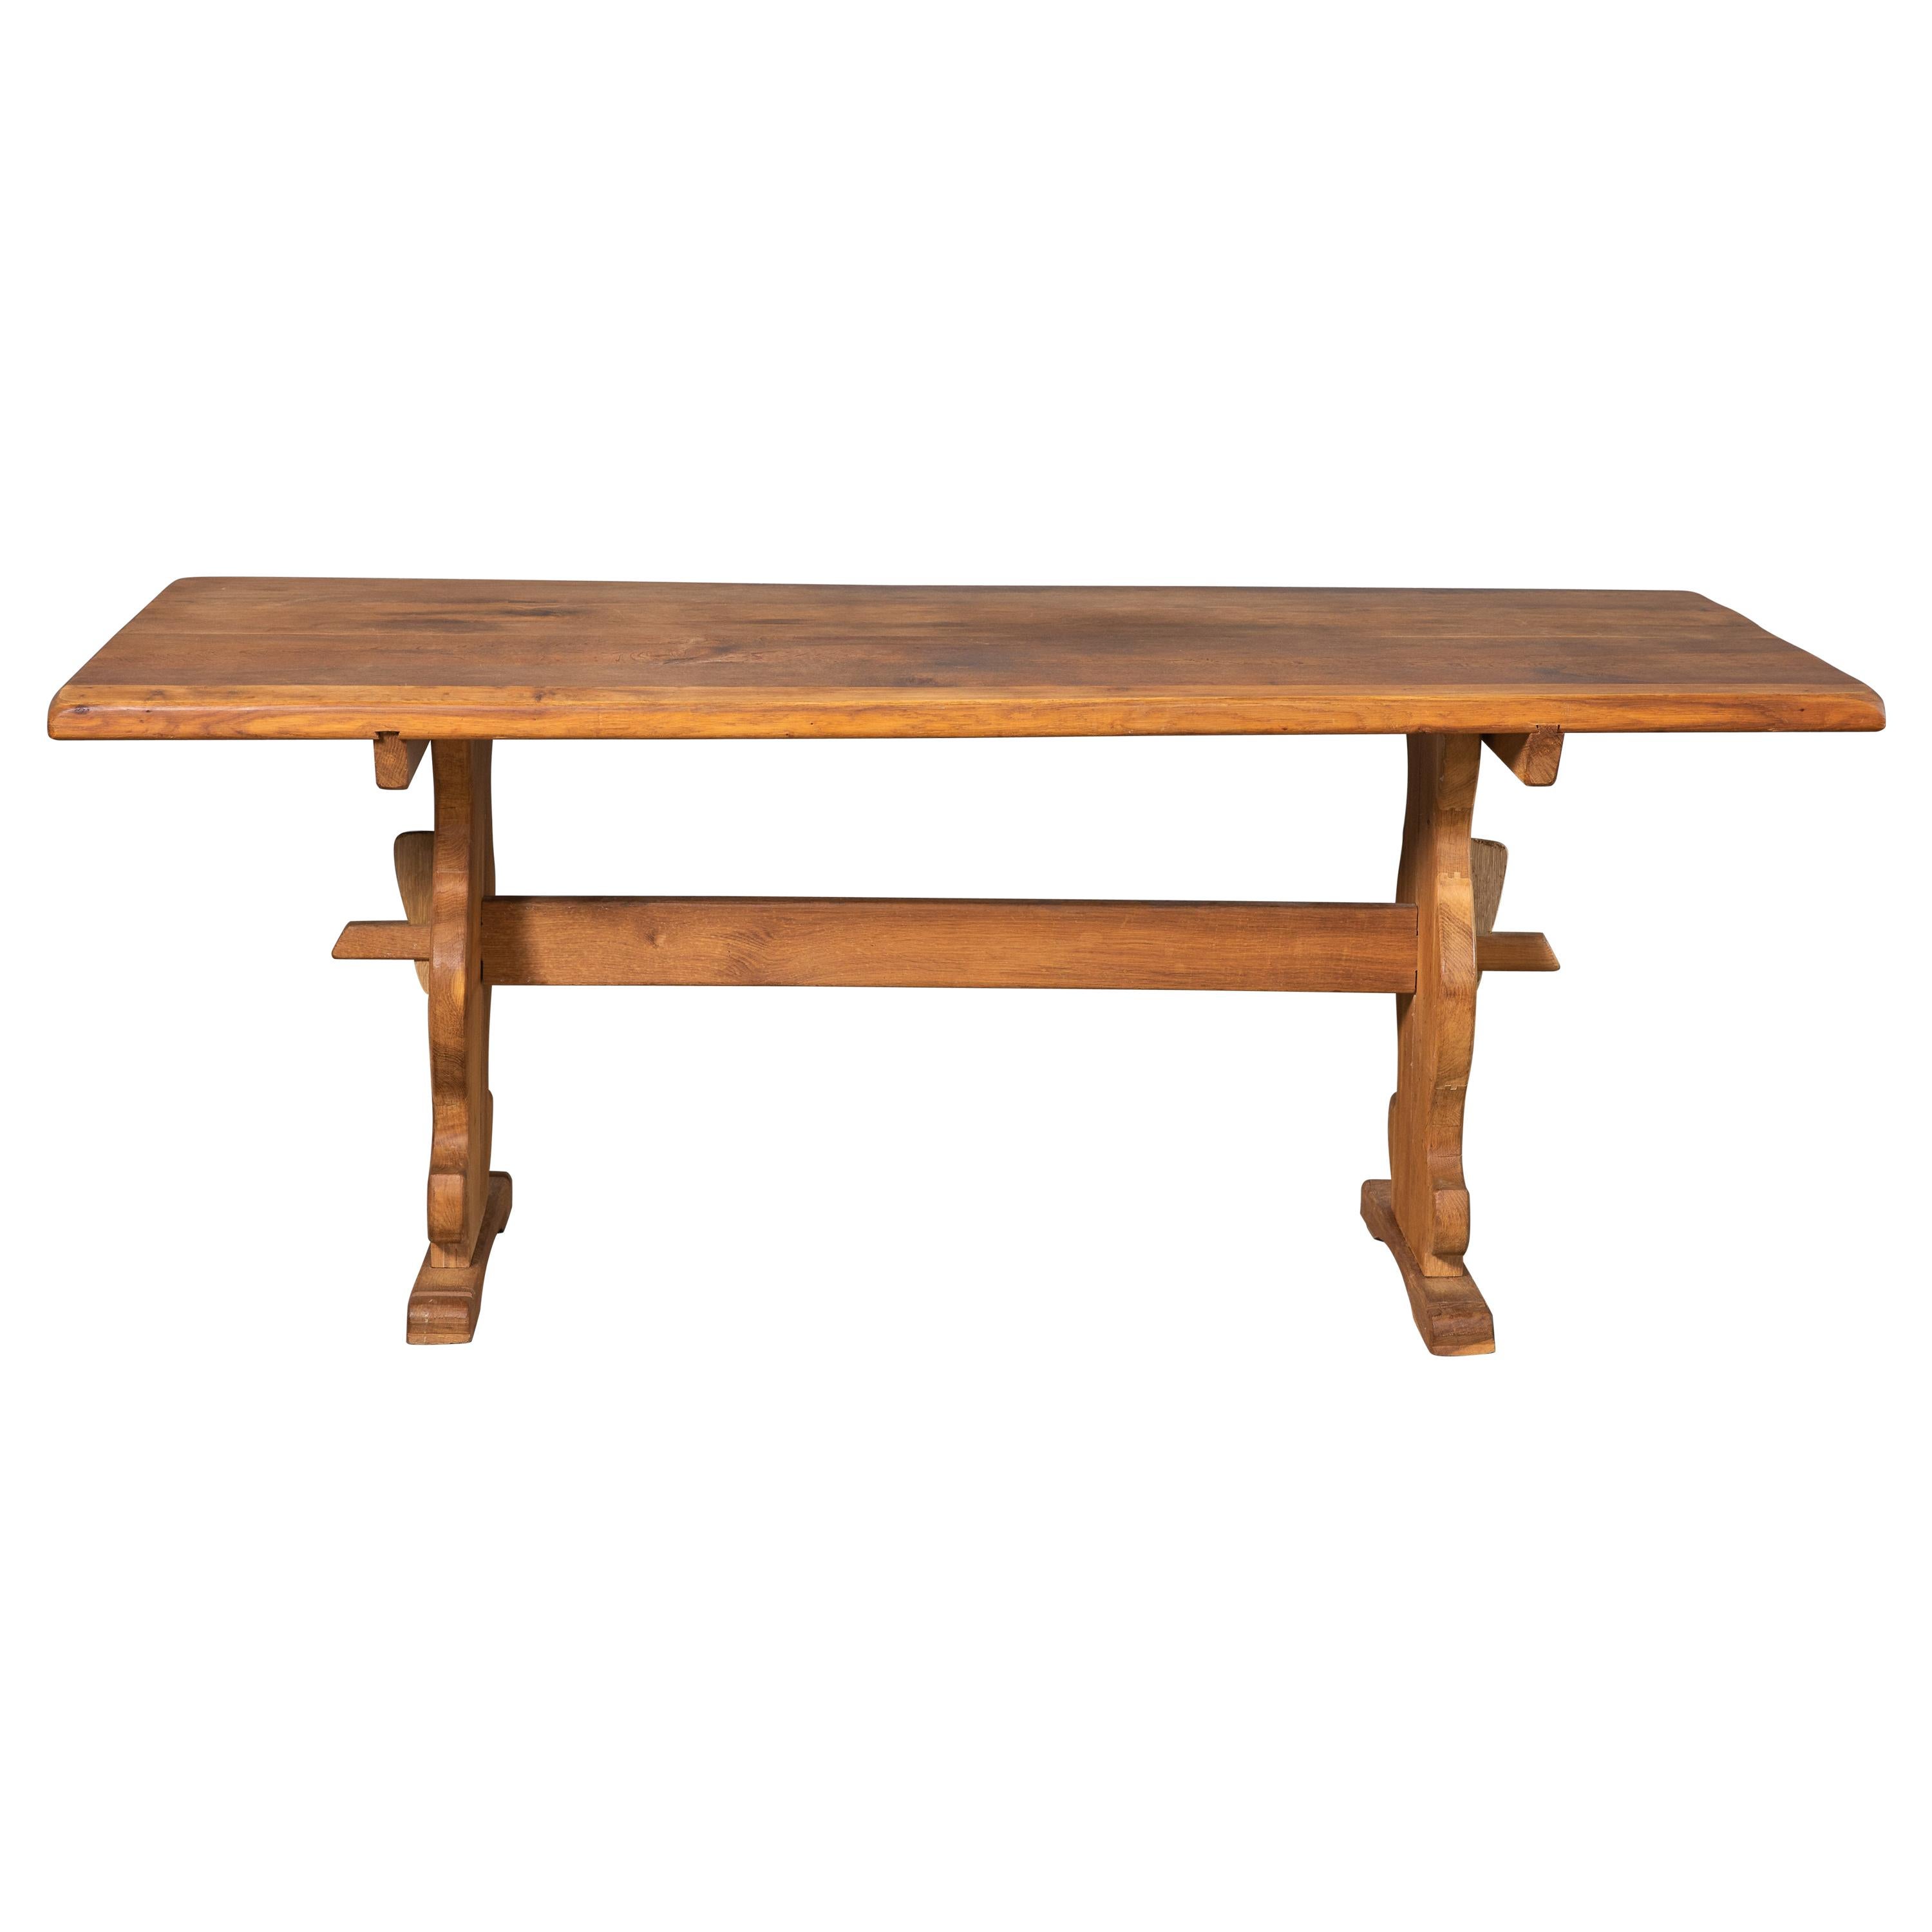 Danish Country Style Dining Table in Oak, ca. Early 1900s